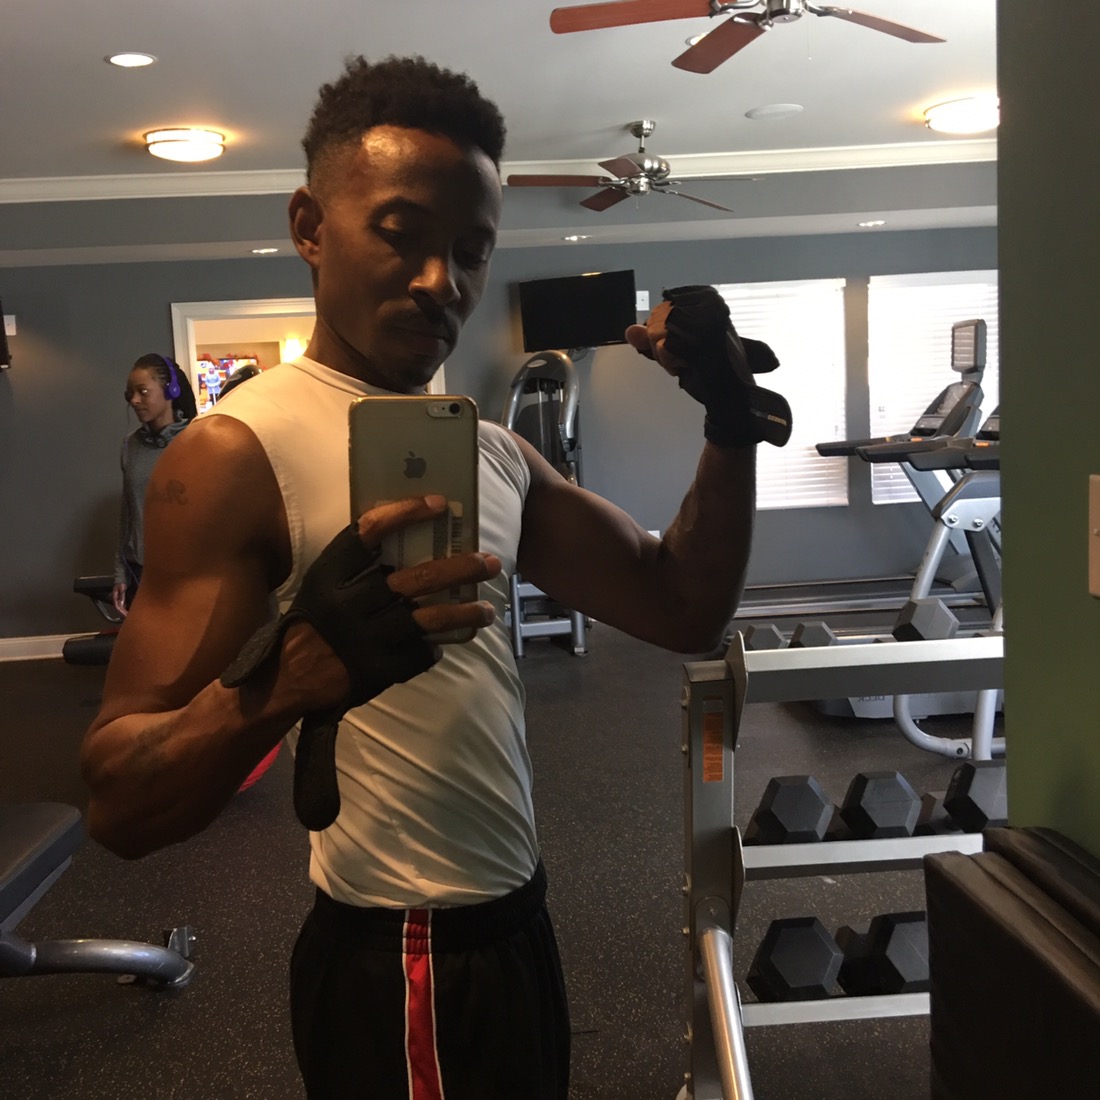 Richbz in the mirror trying to flex at the gym